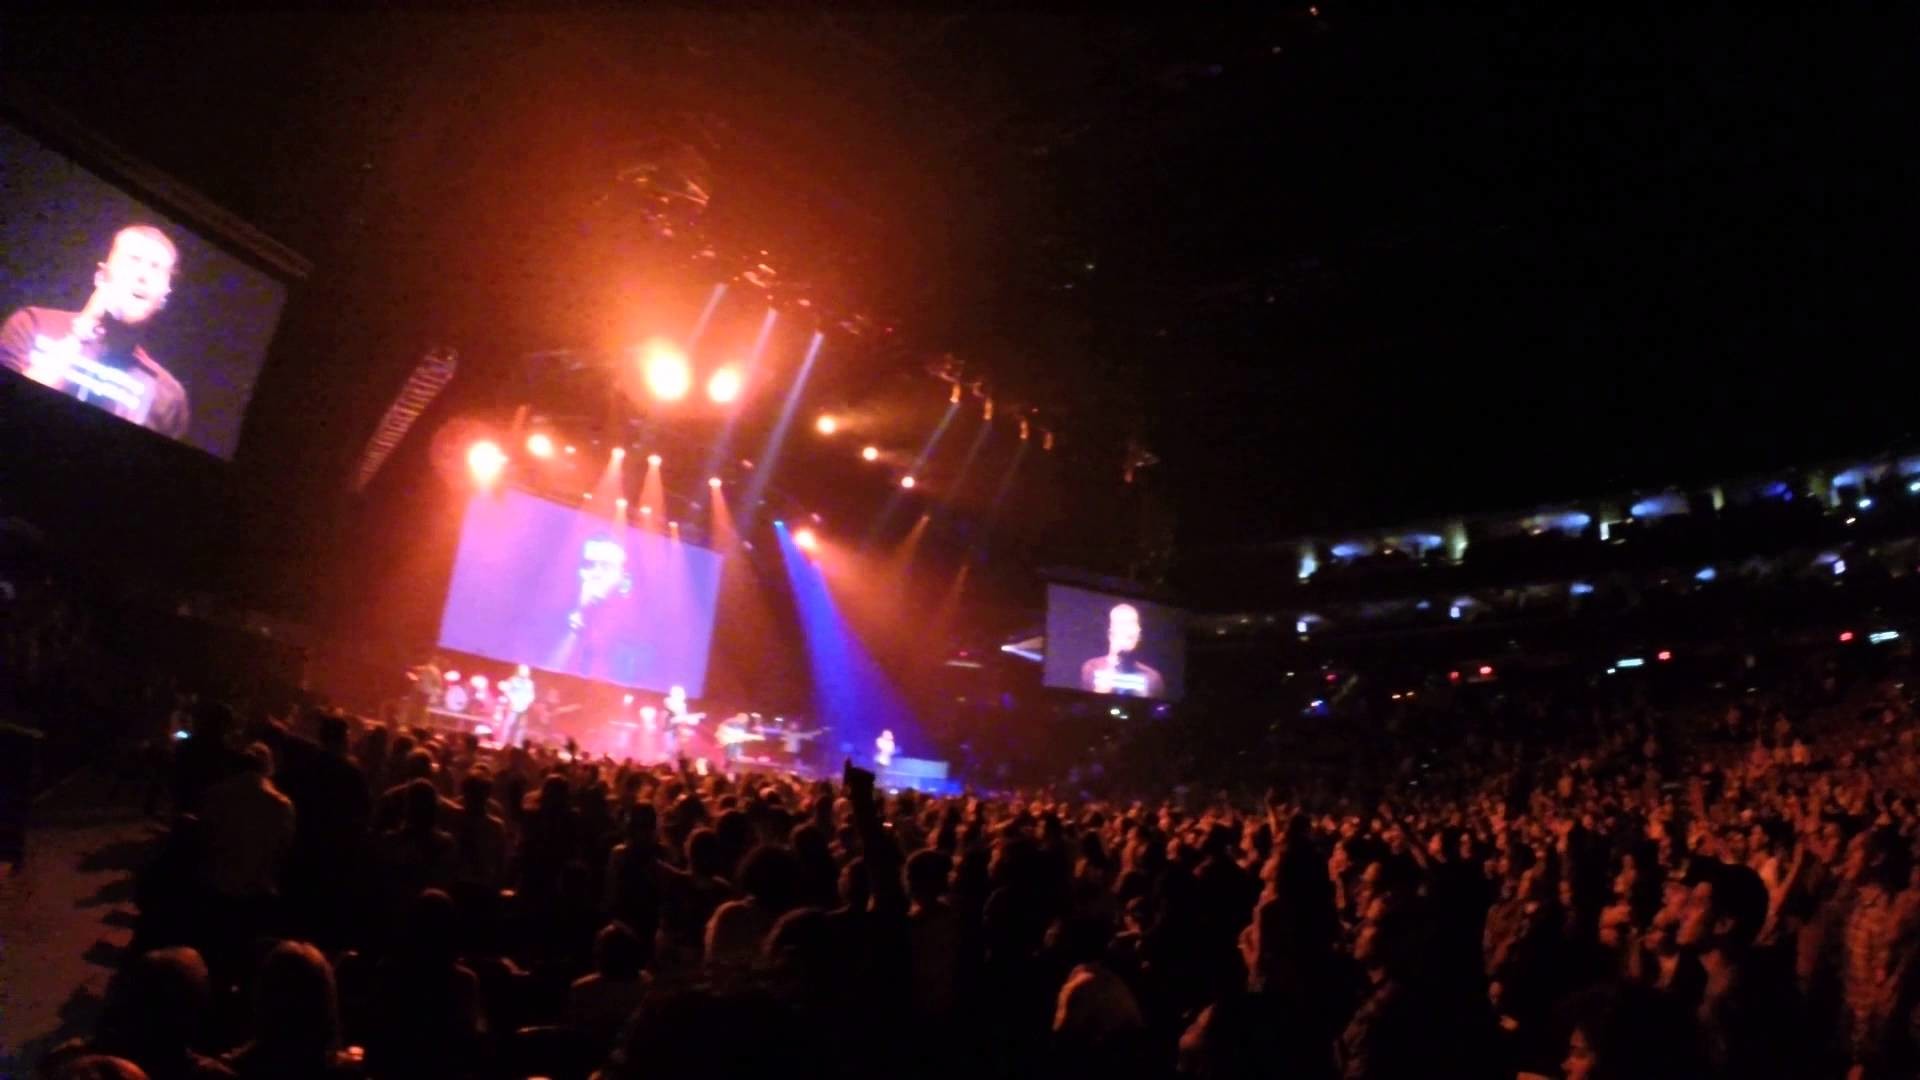 1920x1080 With Everything, Hillsong United, Xtreme Christian Music Conference 2014,  BB&T Center